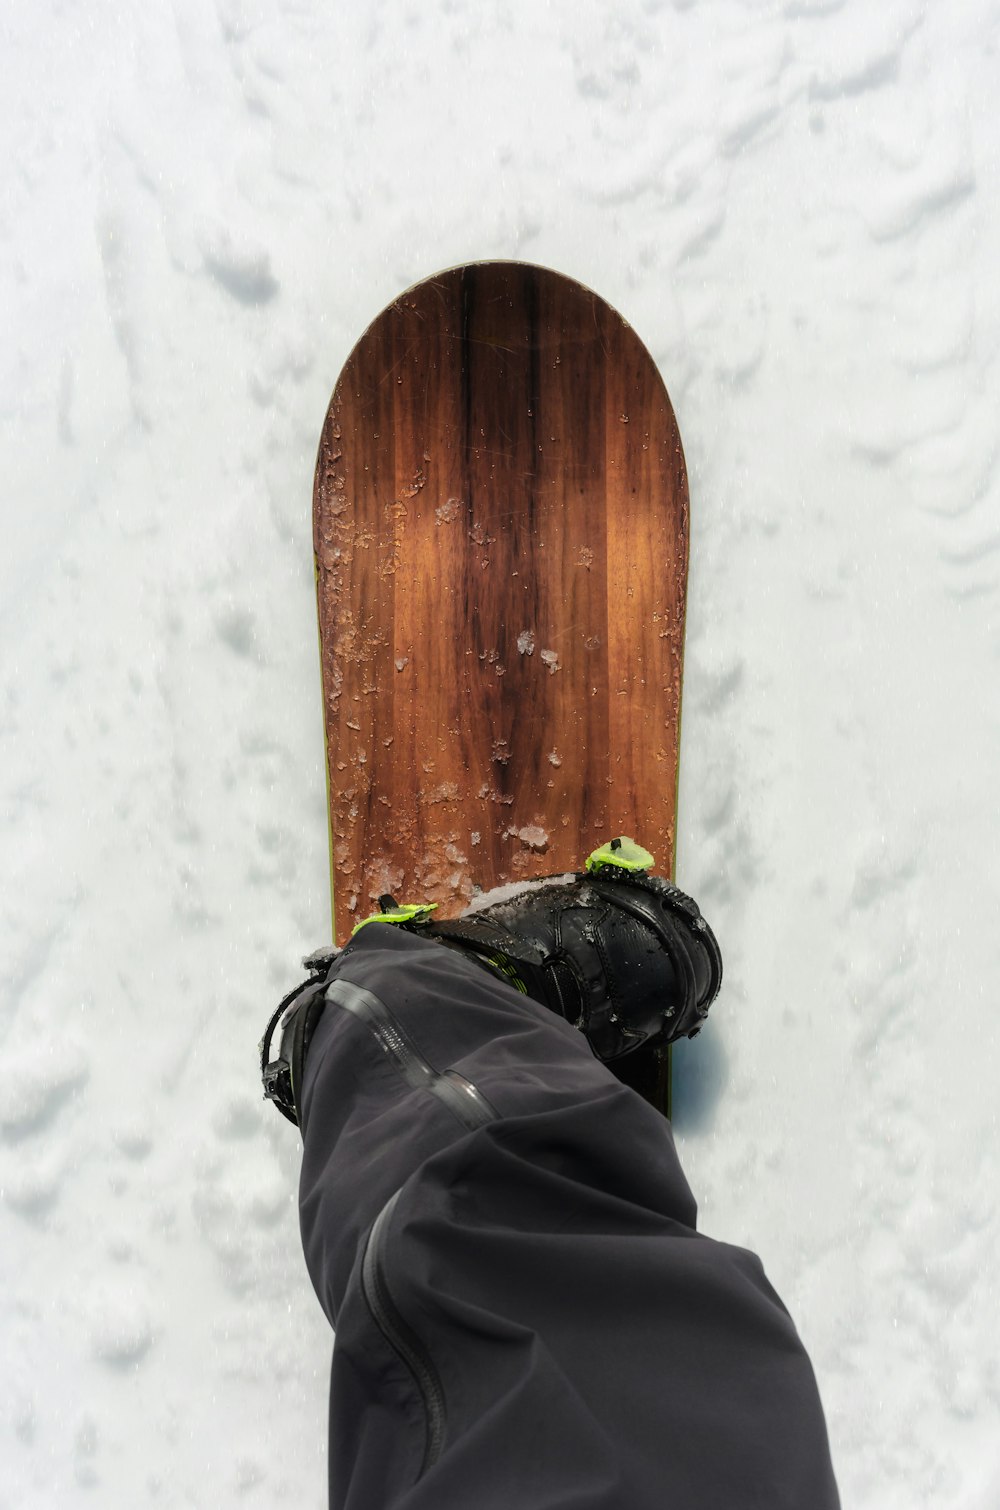 a person's feet in the snow next to a snowboard